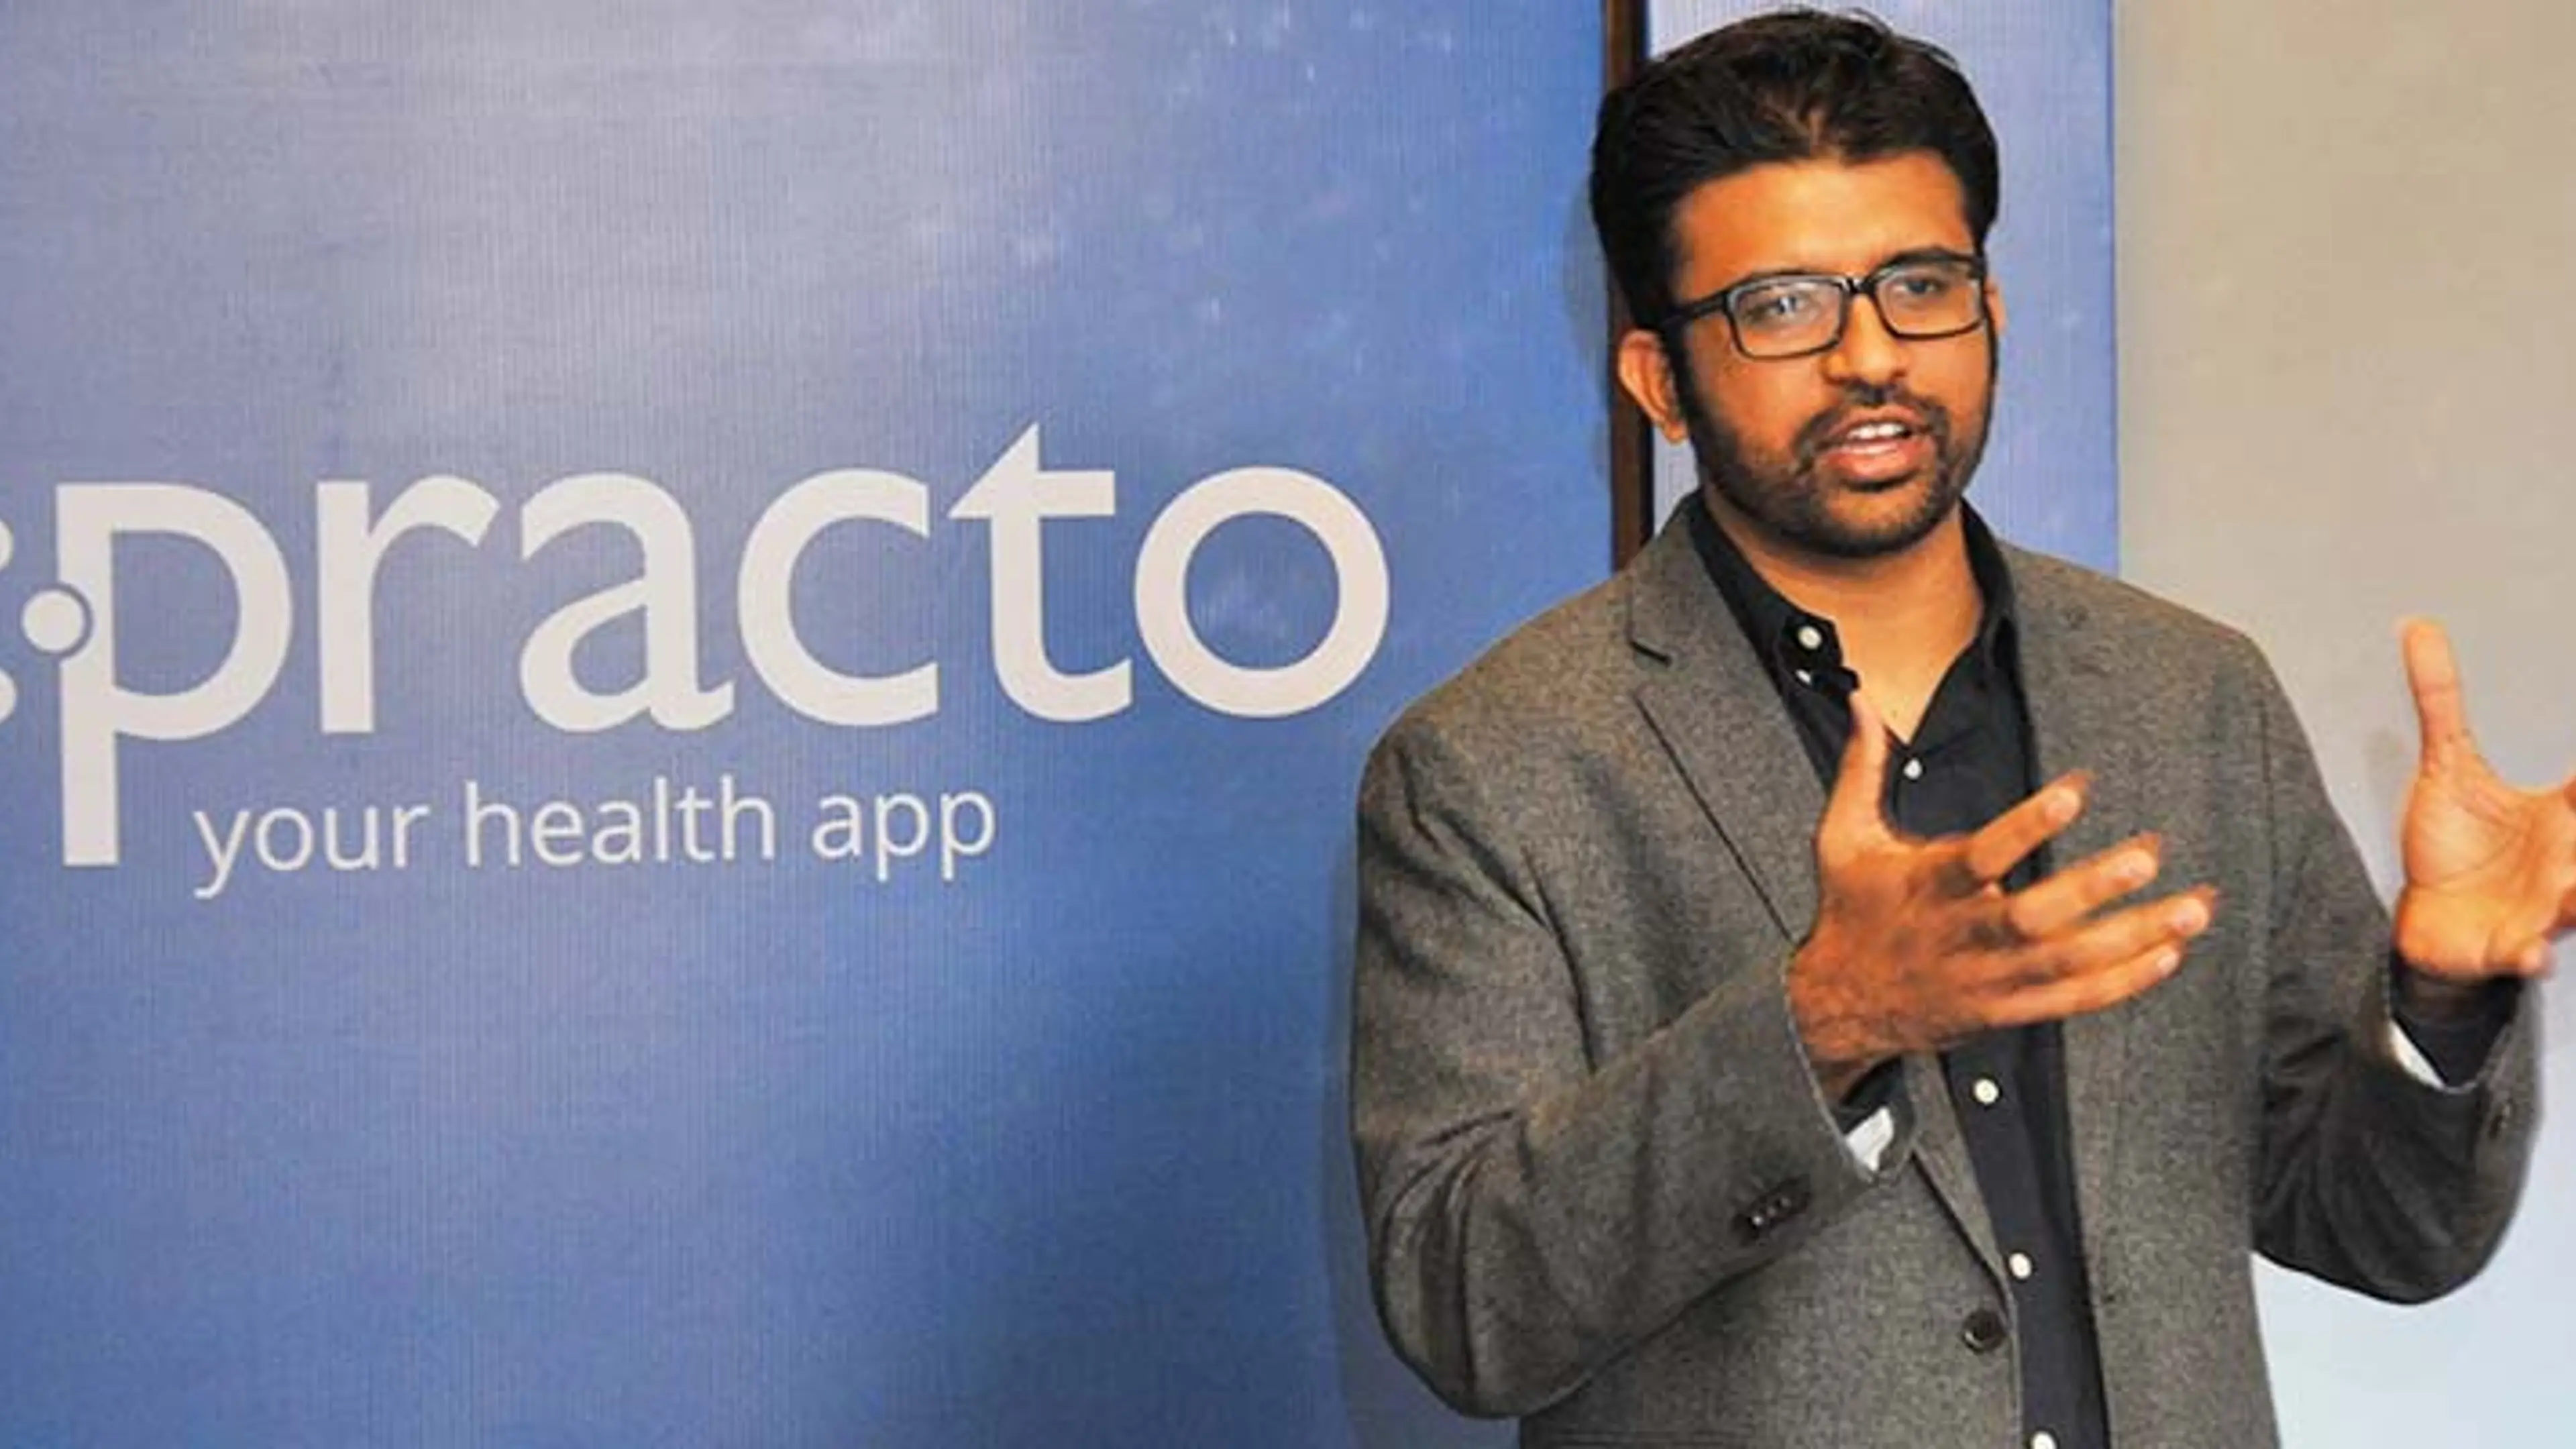 Practo is ‘Do-ing Great’, secures $90M funding